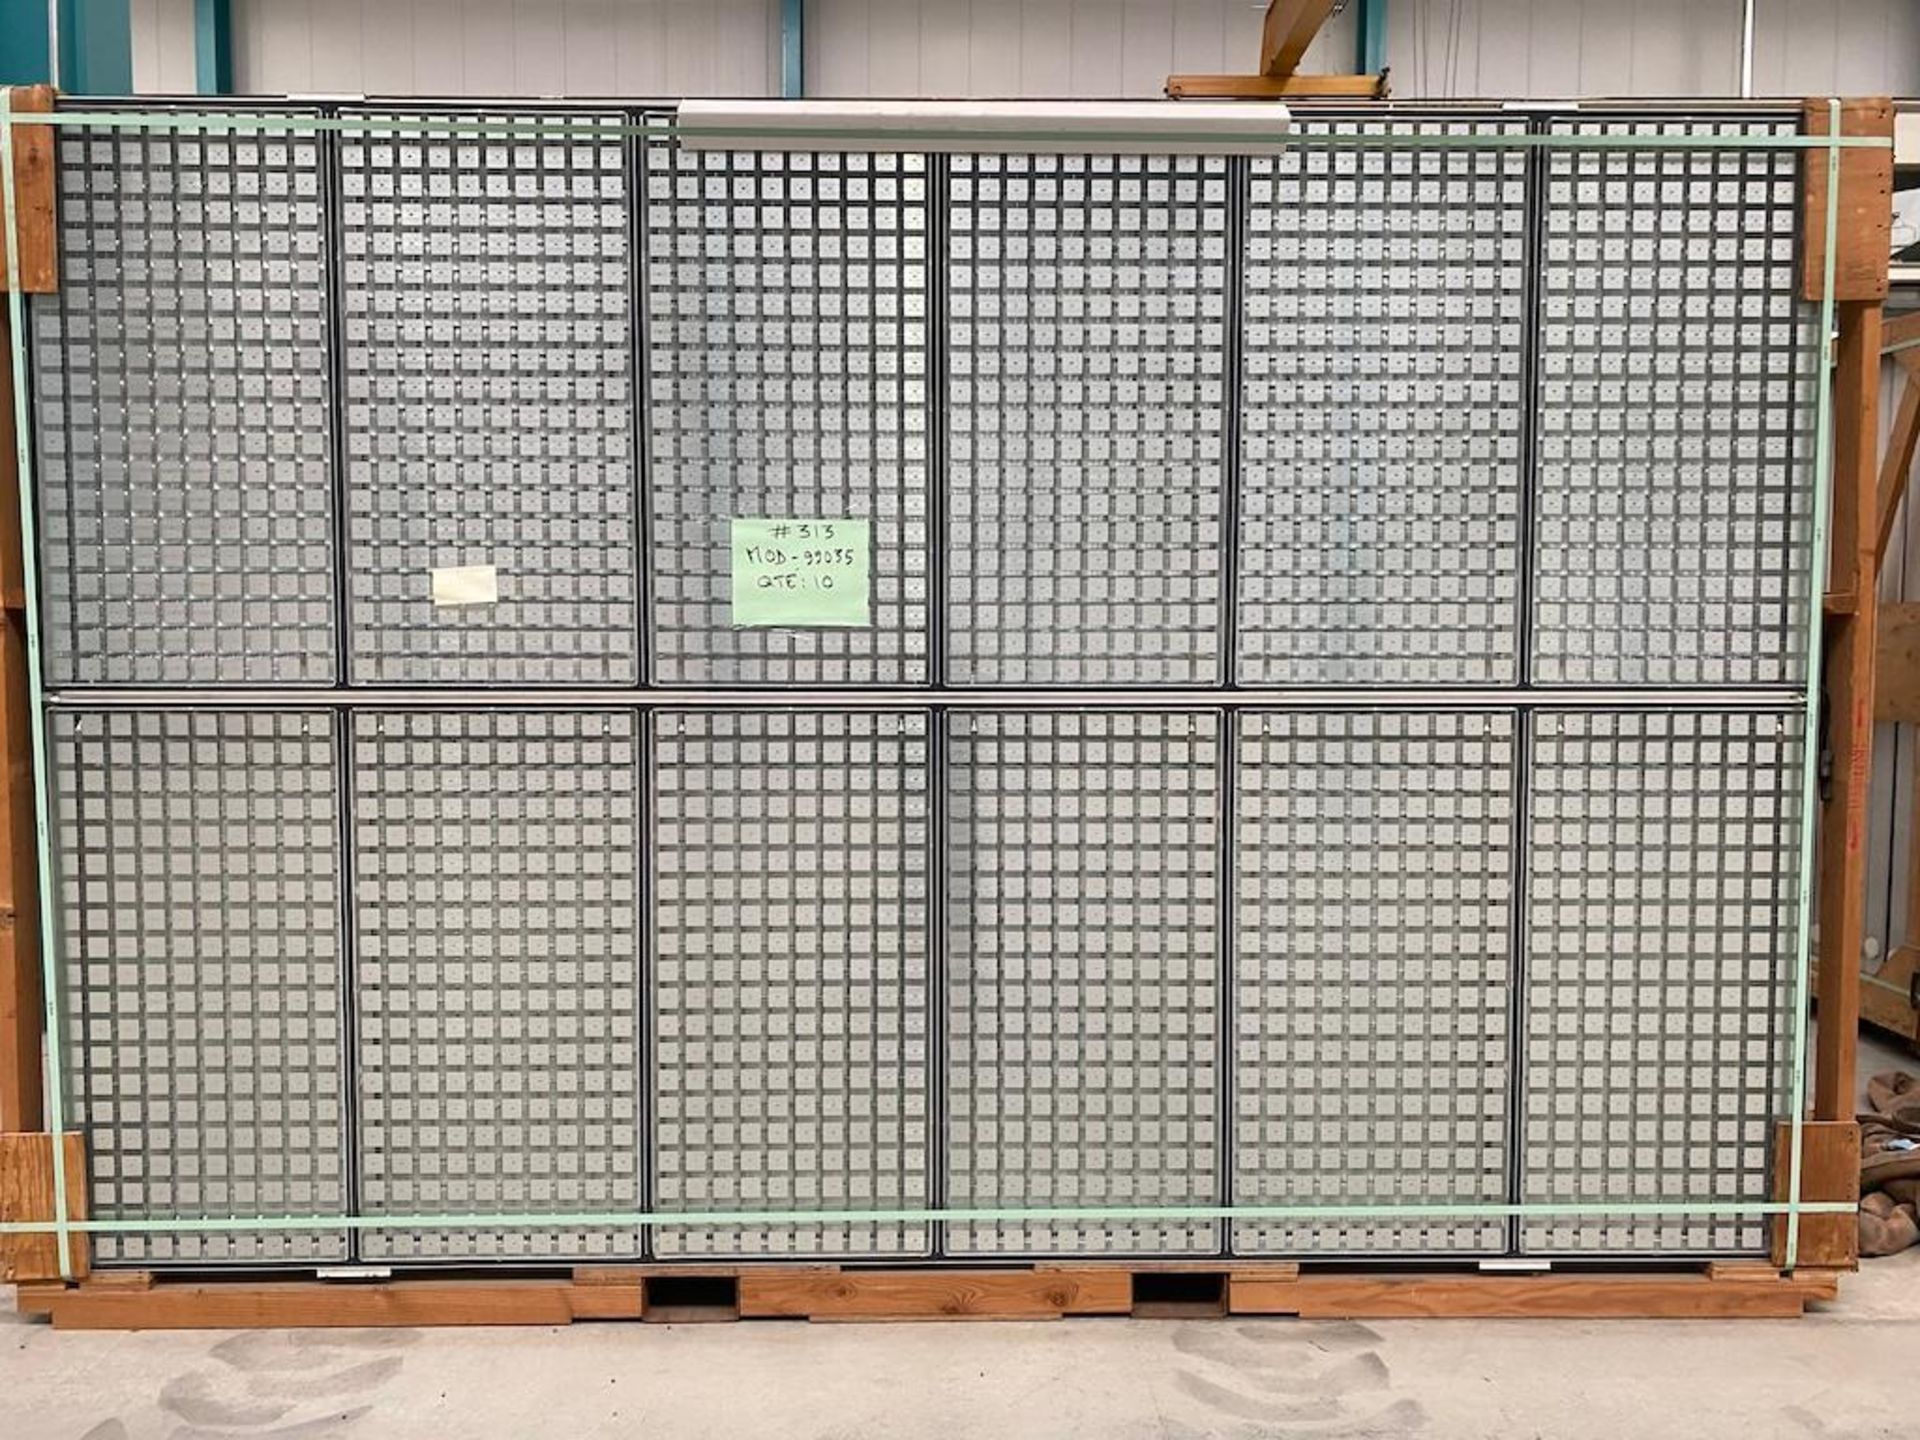 LOT OF 70 CPV SOLAR PANELS, 2,550 WATTS PER PANEL,1000 VOLTS PER PANEL [MATANE] *PLEASE NOTE, EXCLUS - Image 11 of 13